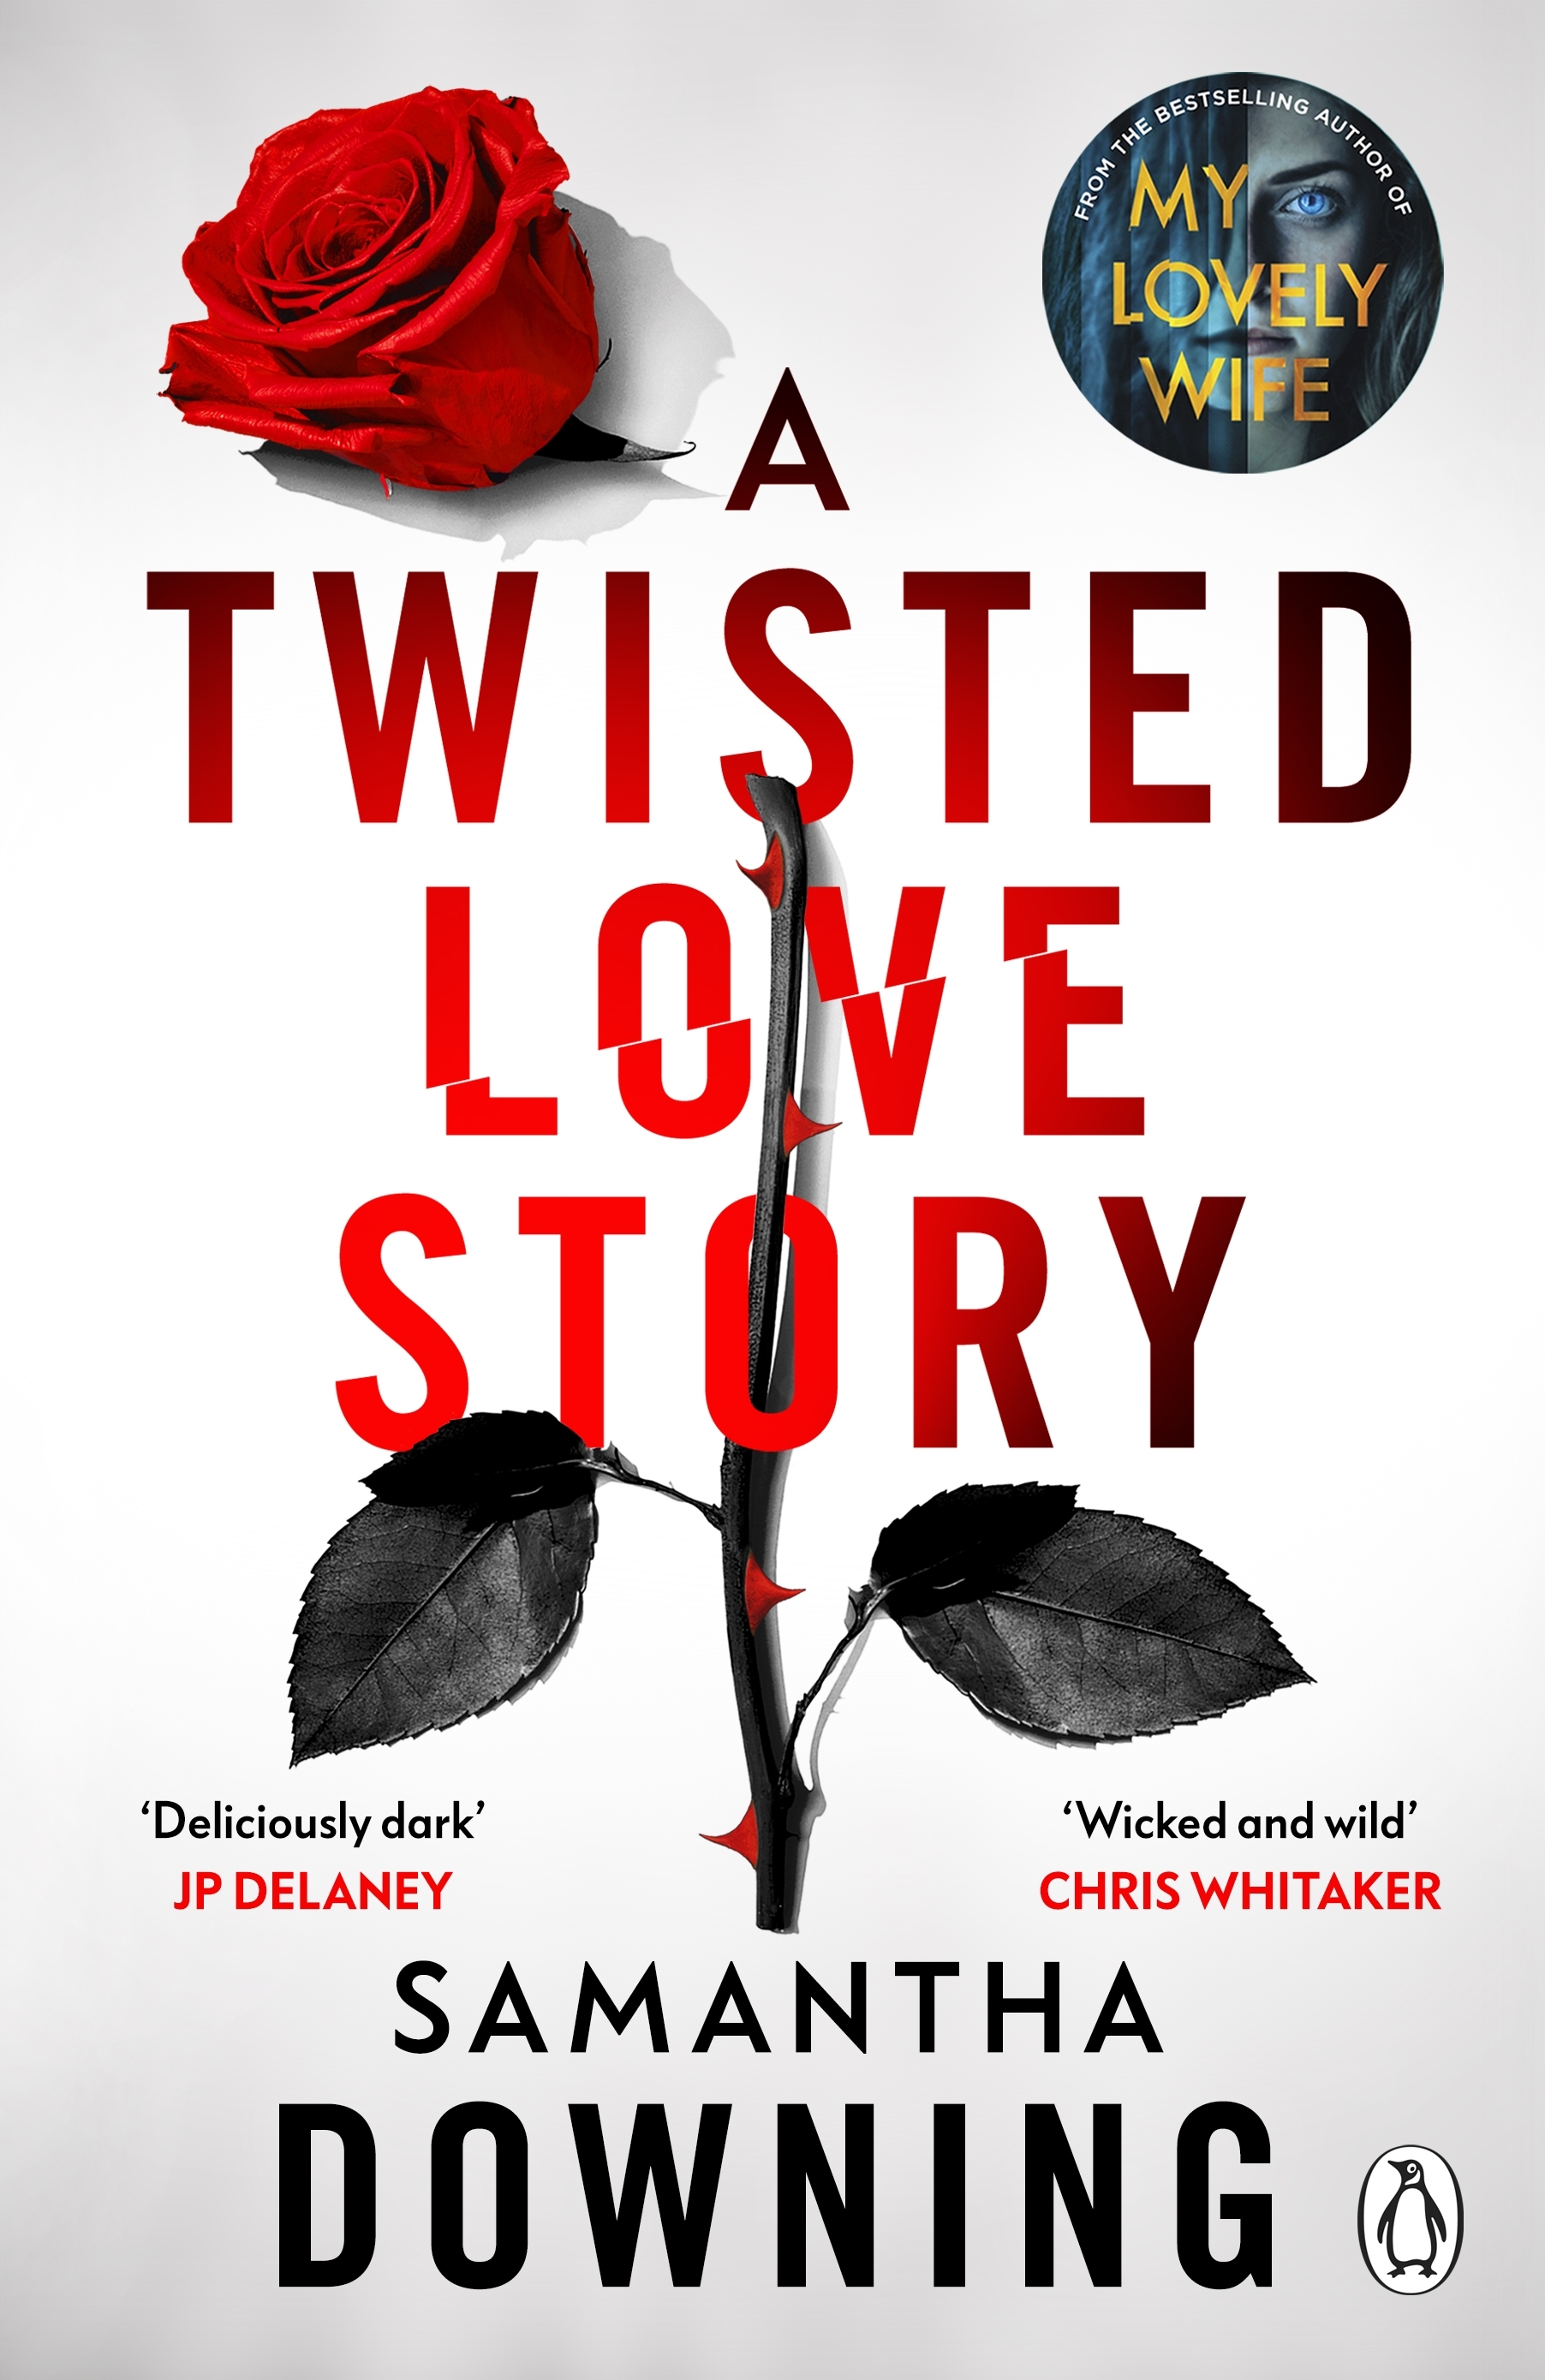 A Twisted Love Story by Samantha Downing - Penguin Books Australia